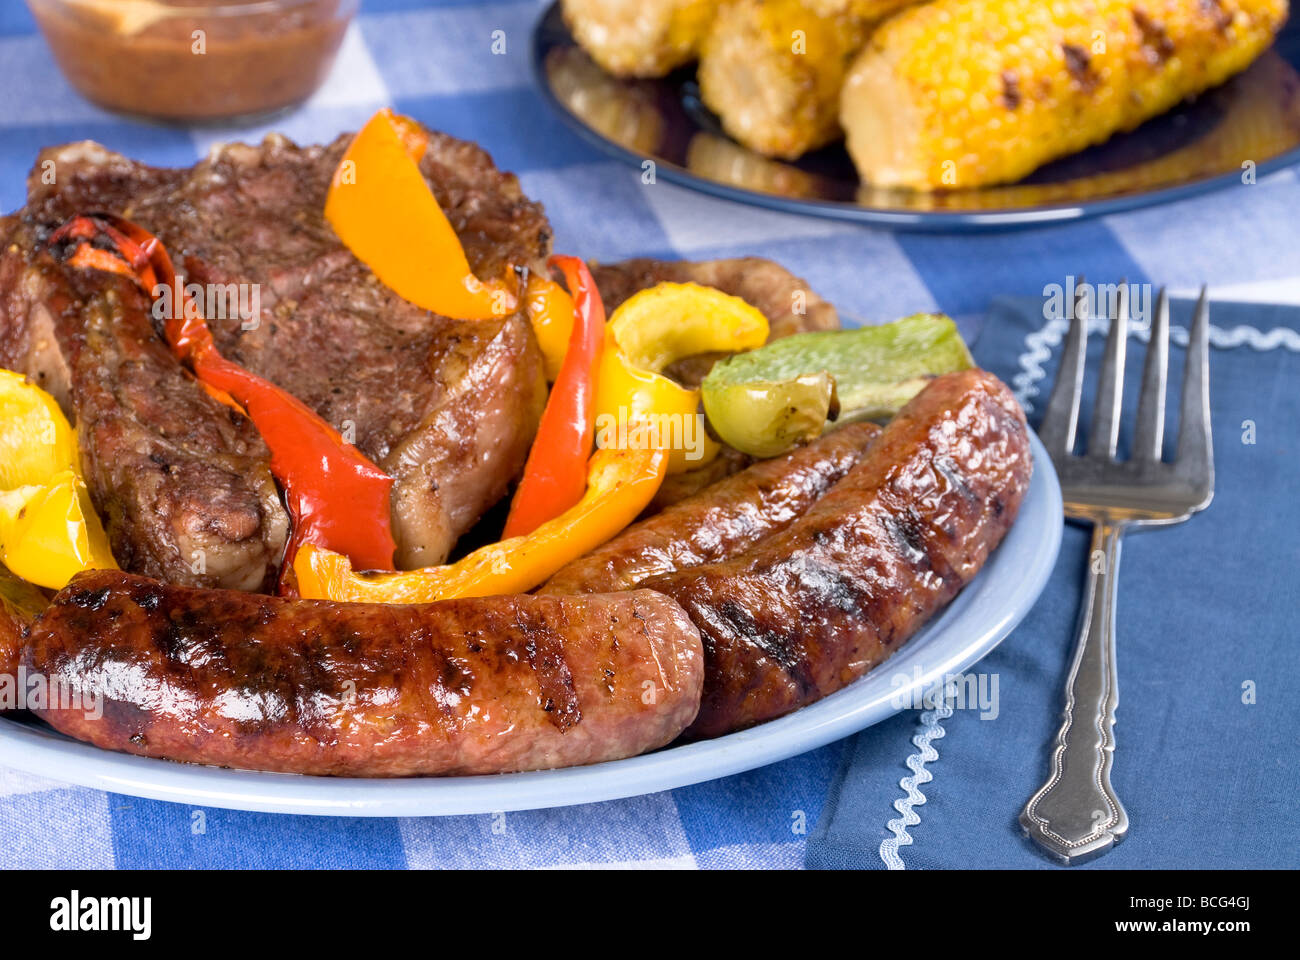 A bratwurst and steak dinner with corn on the cob on a picnic table and tablecloth Stock Photo